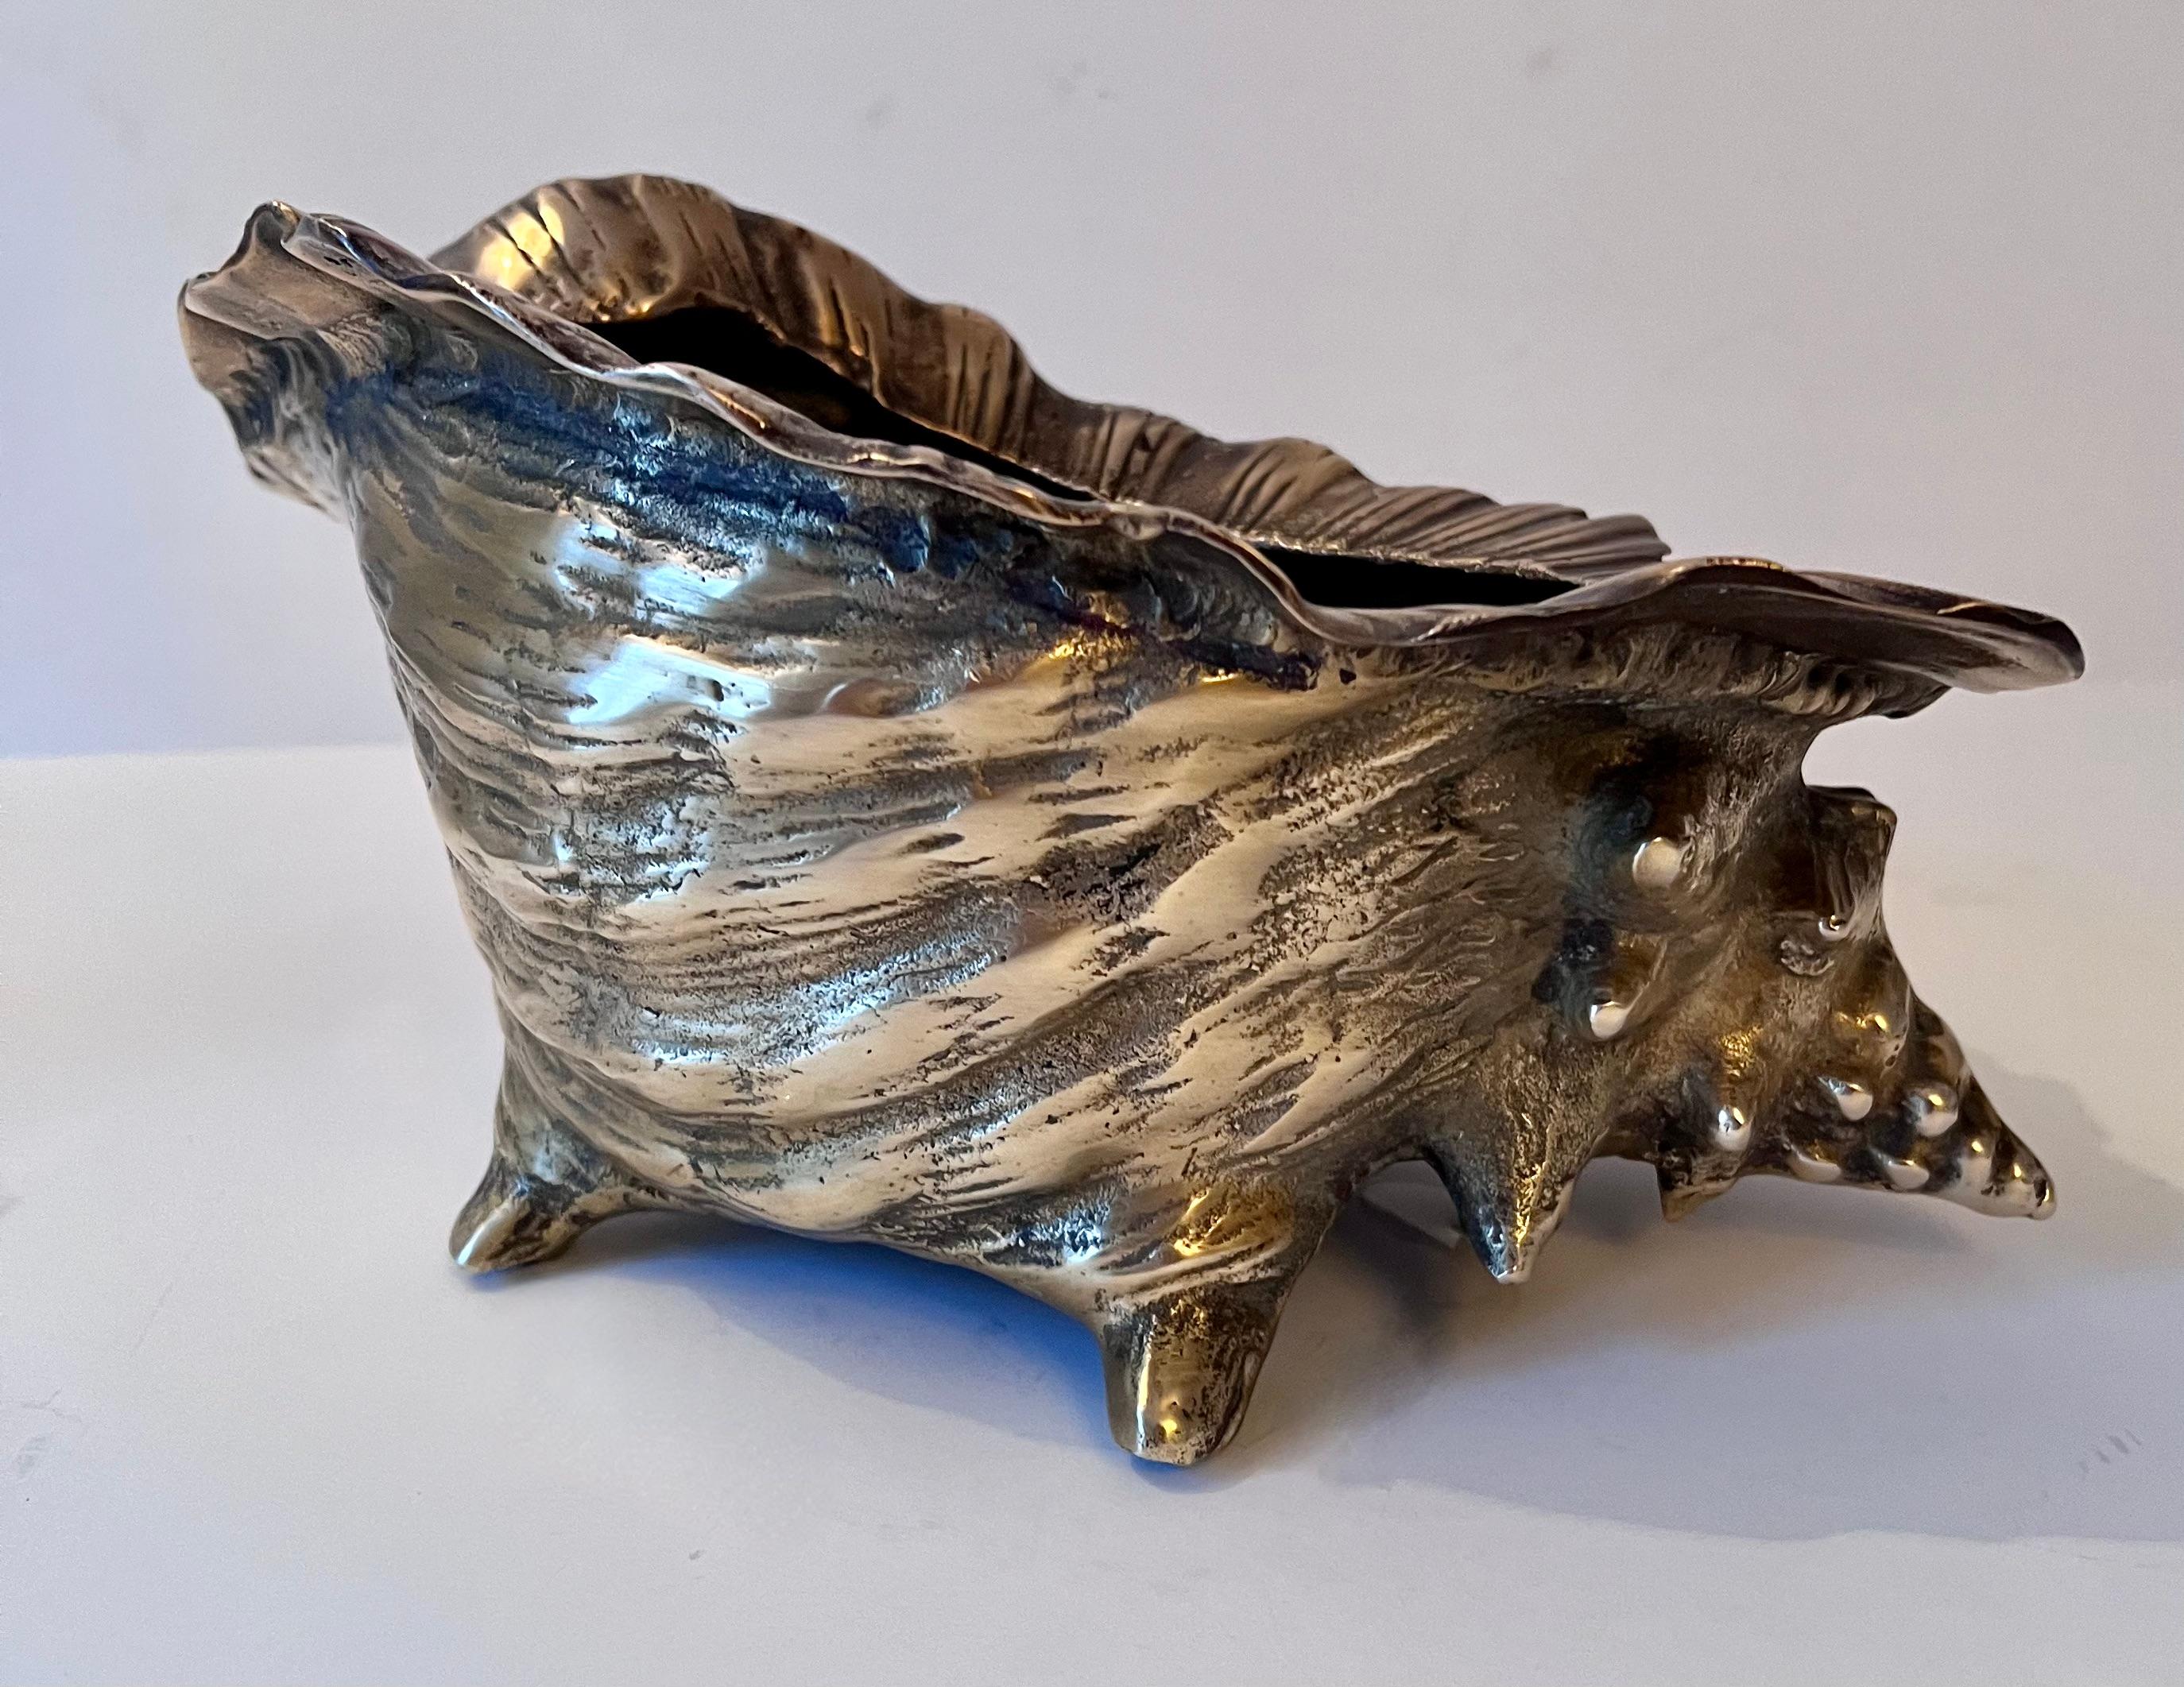 Polished Bronze Grotto Conch Shell Planter or Jardiniere